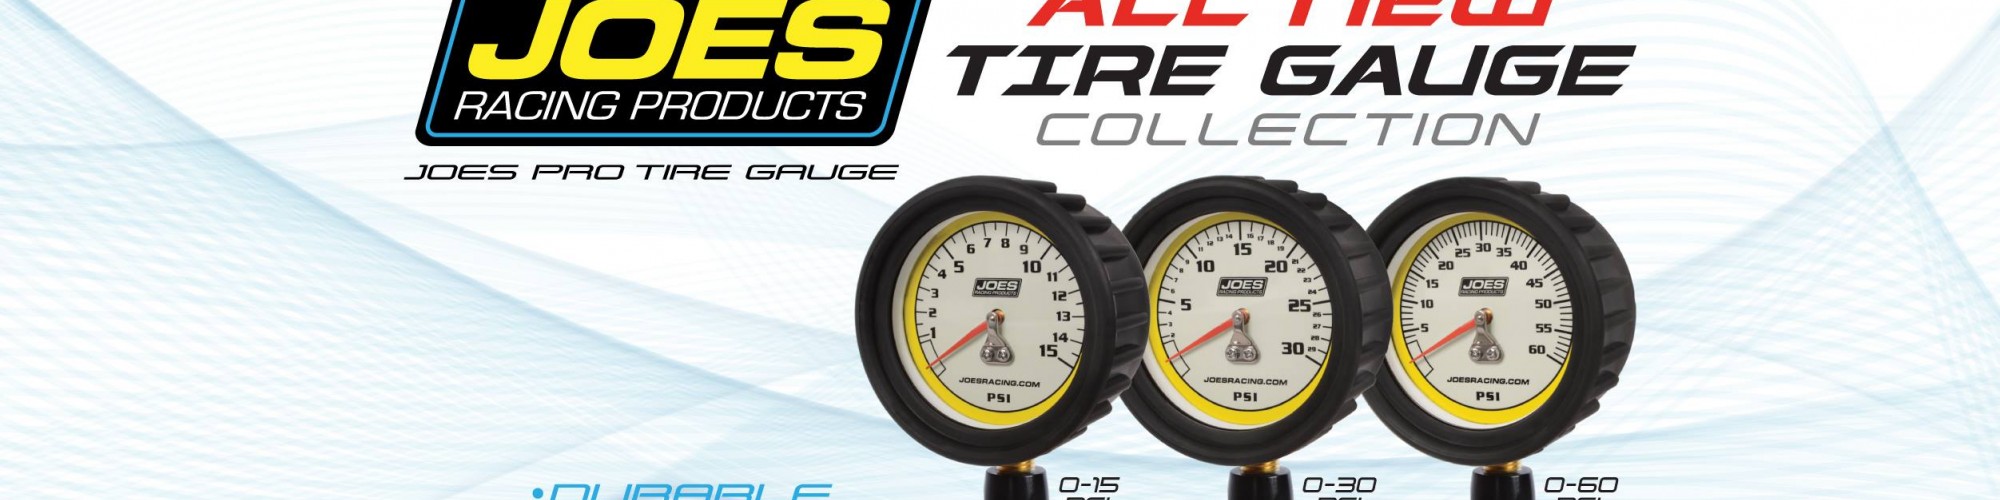 Joes Racing Products cover image